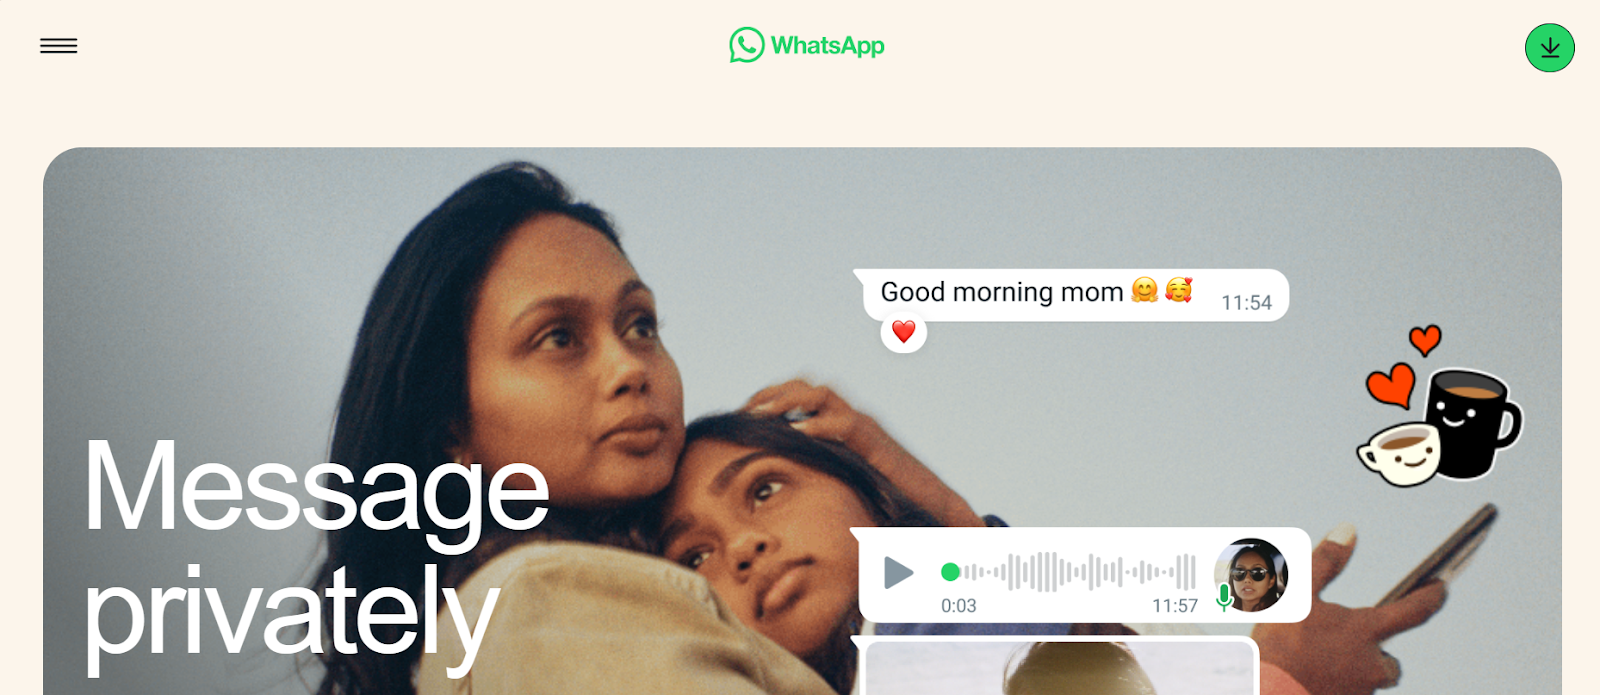 WhatsApp website snapshot highlighting the services it offers.